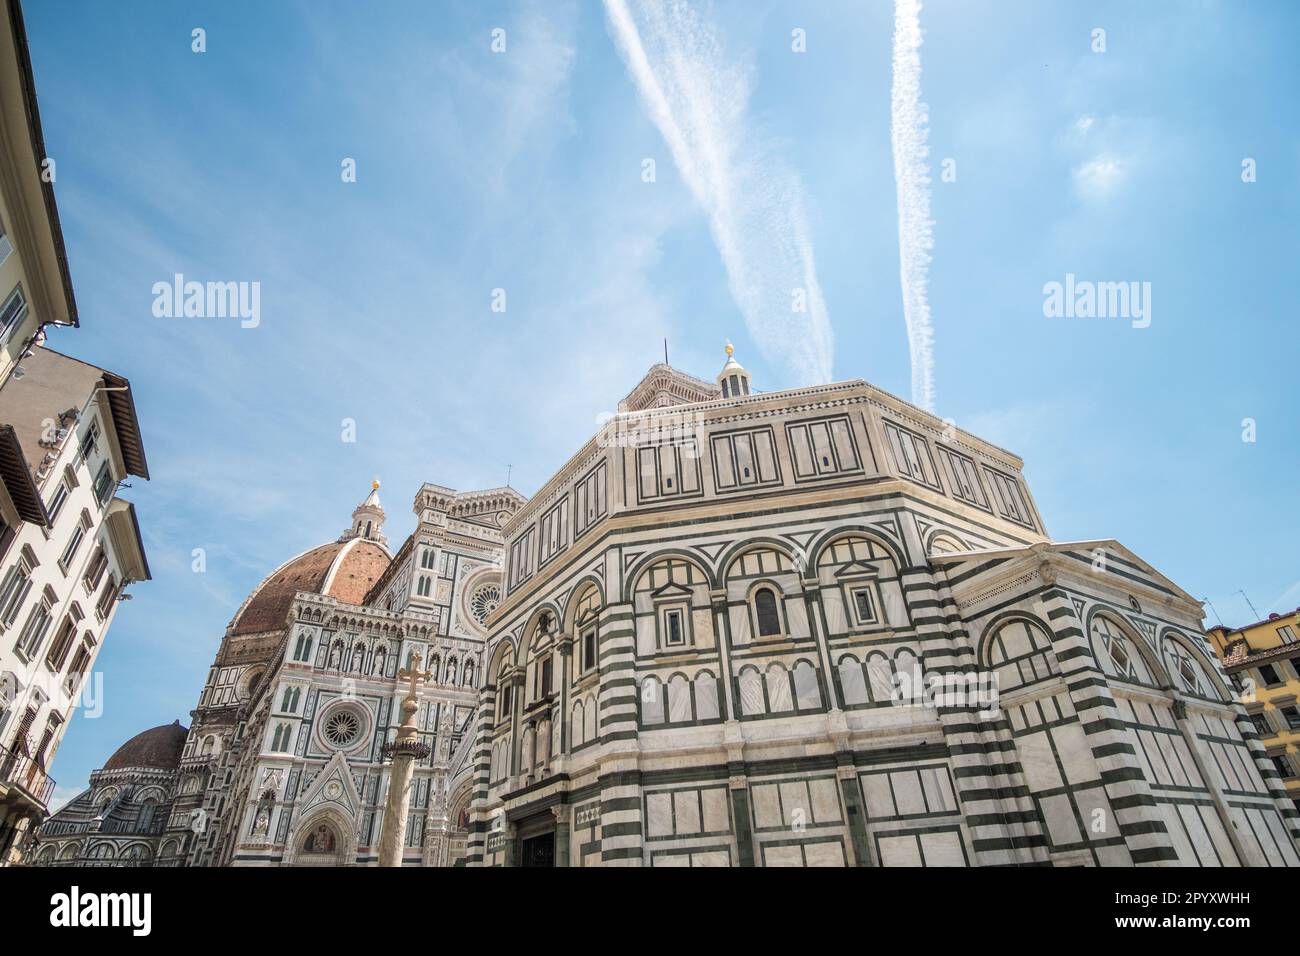 Detail of Florence Duomo Cathedral. Basilica di Santa Maria del Fiore or Basilica of Saint Mary of the Flower in Florence, Italy Stock Photo